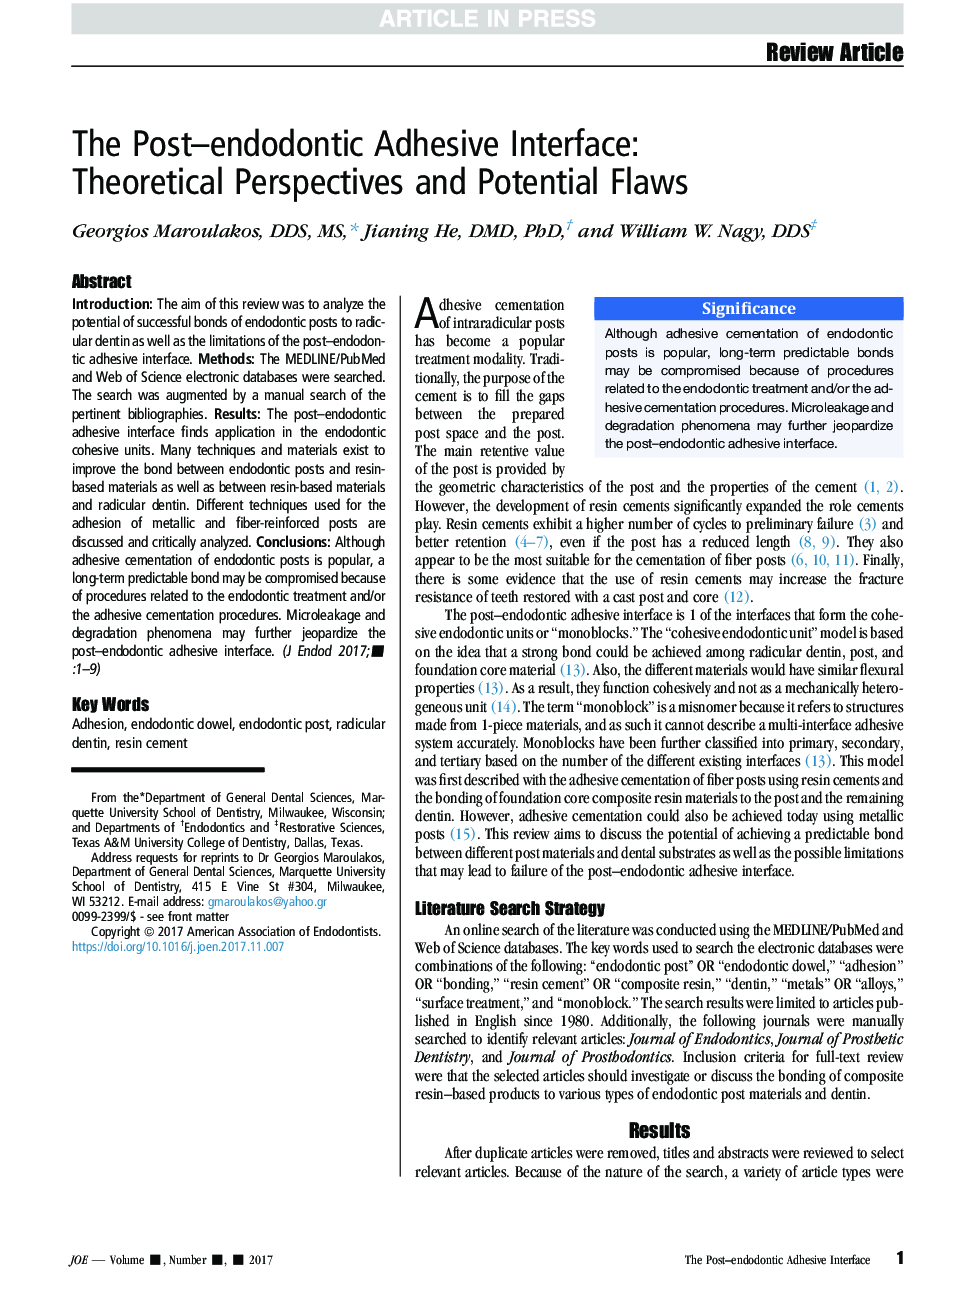 The Post-endodontic Adhesive Interface: Theoretical Perspectives and Potential Flaws